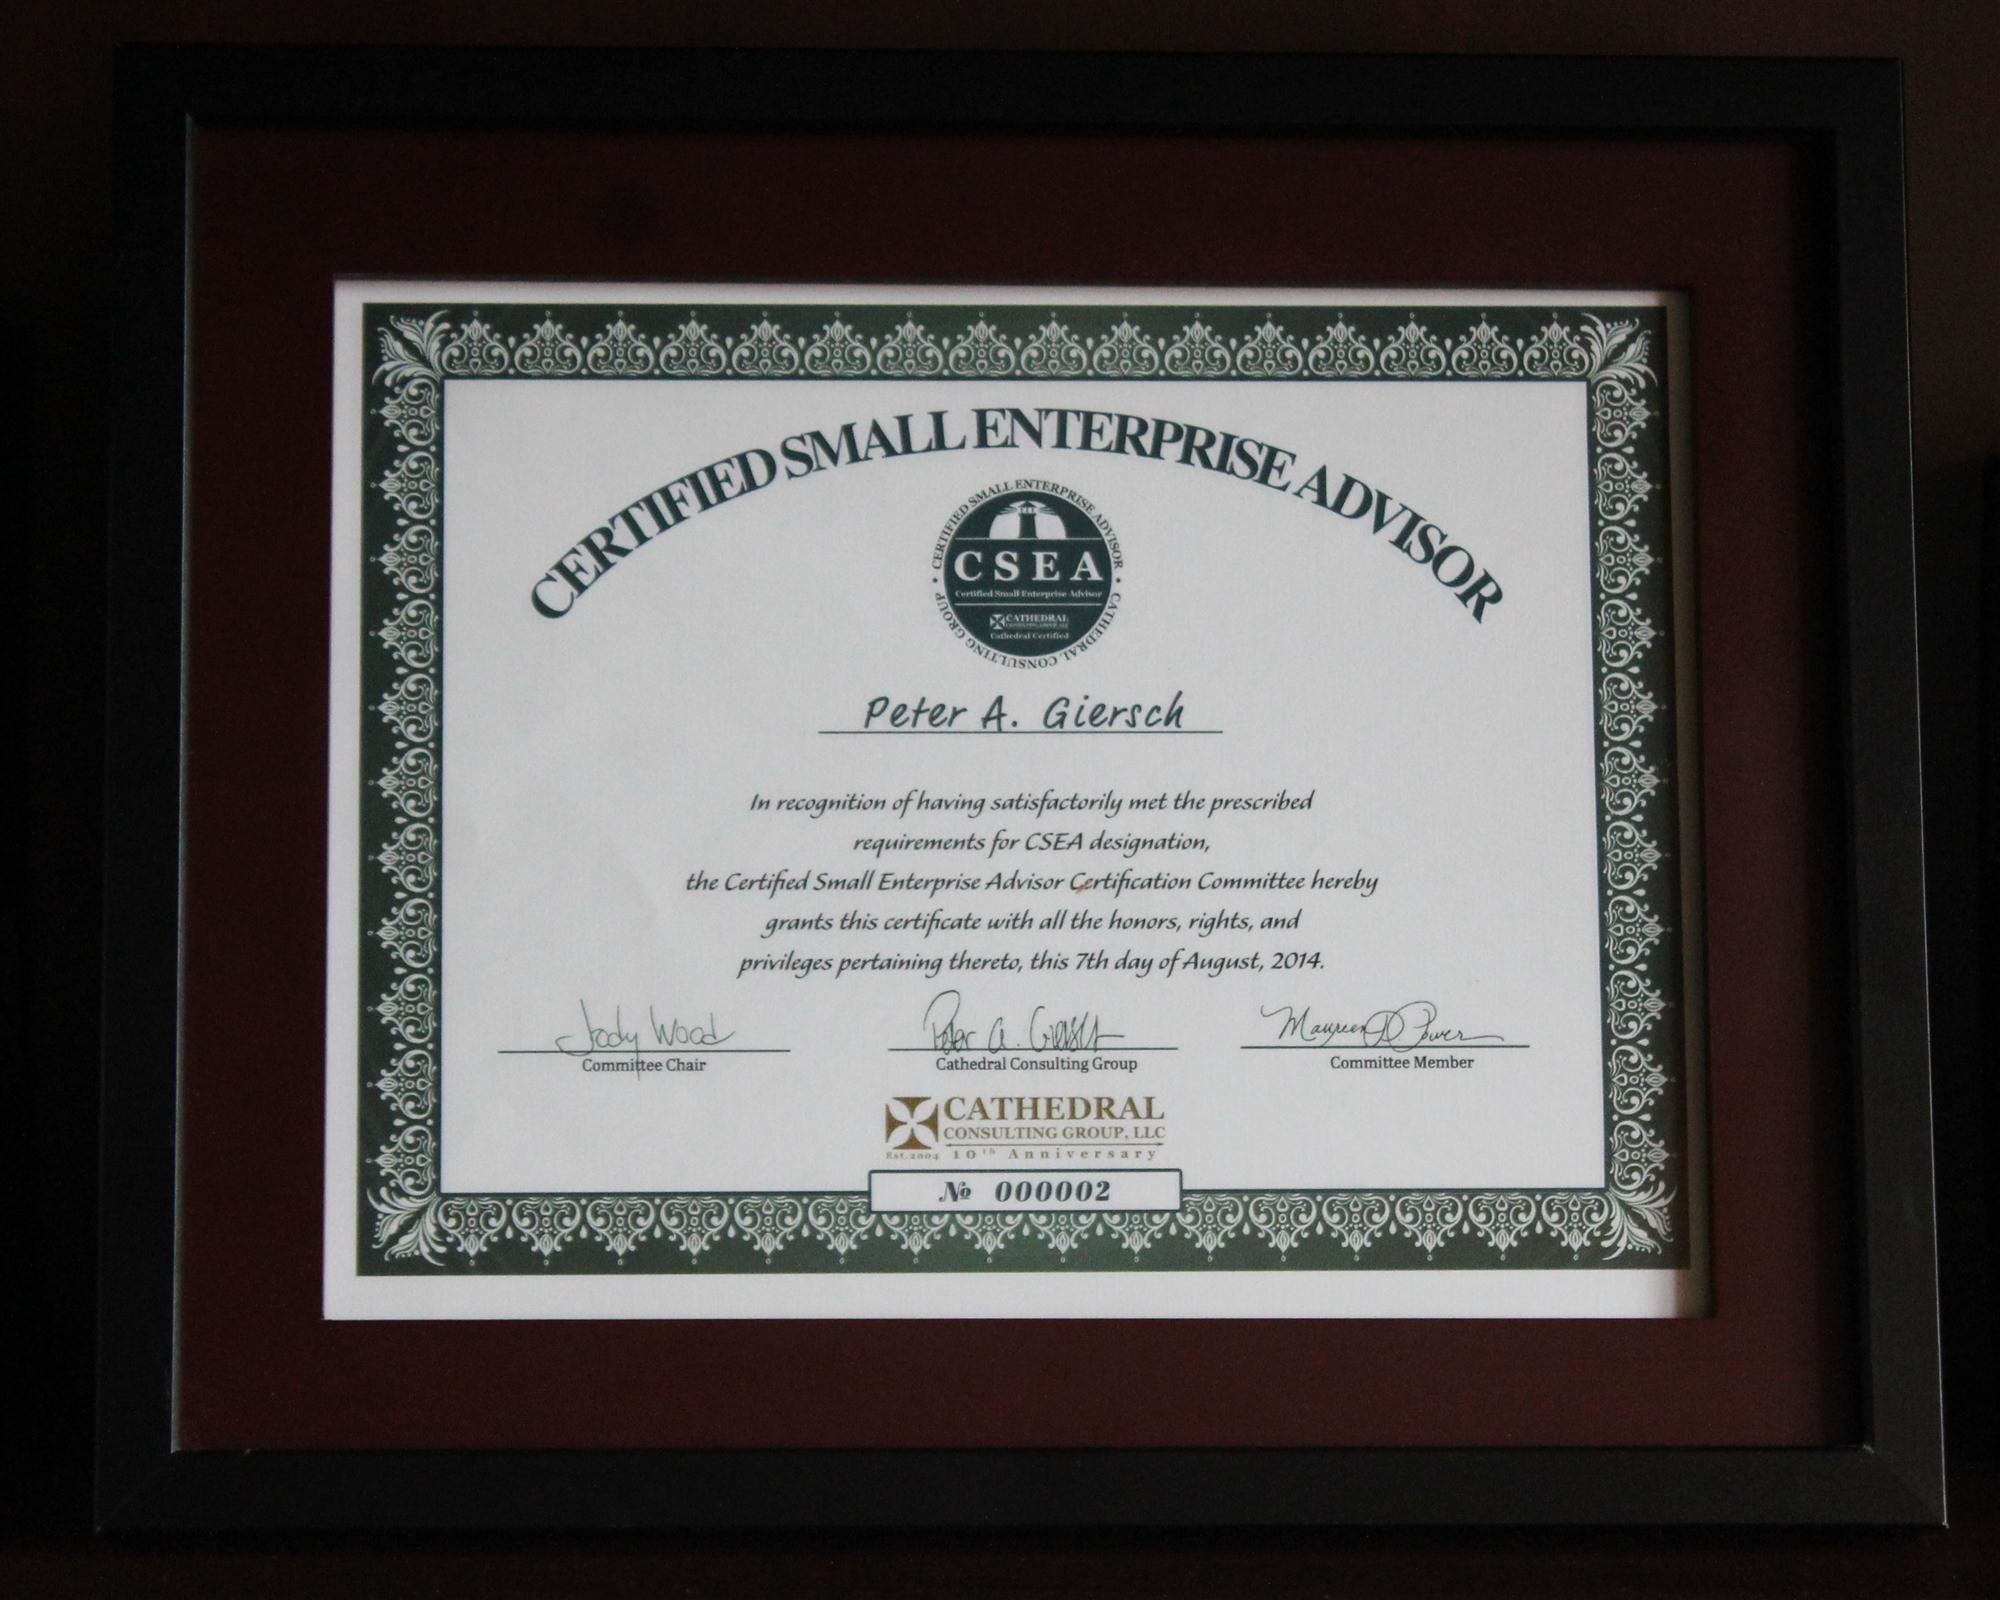 Certificate issued to Peter Giersch for Certified Small Enterprise Advisor CSEA designation